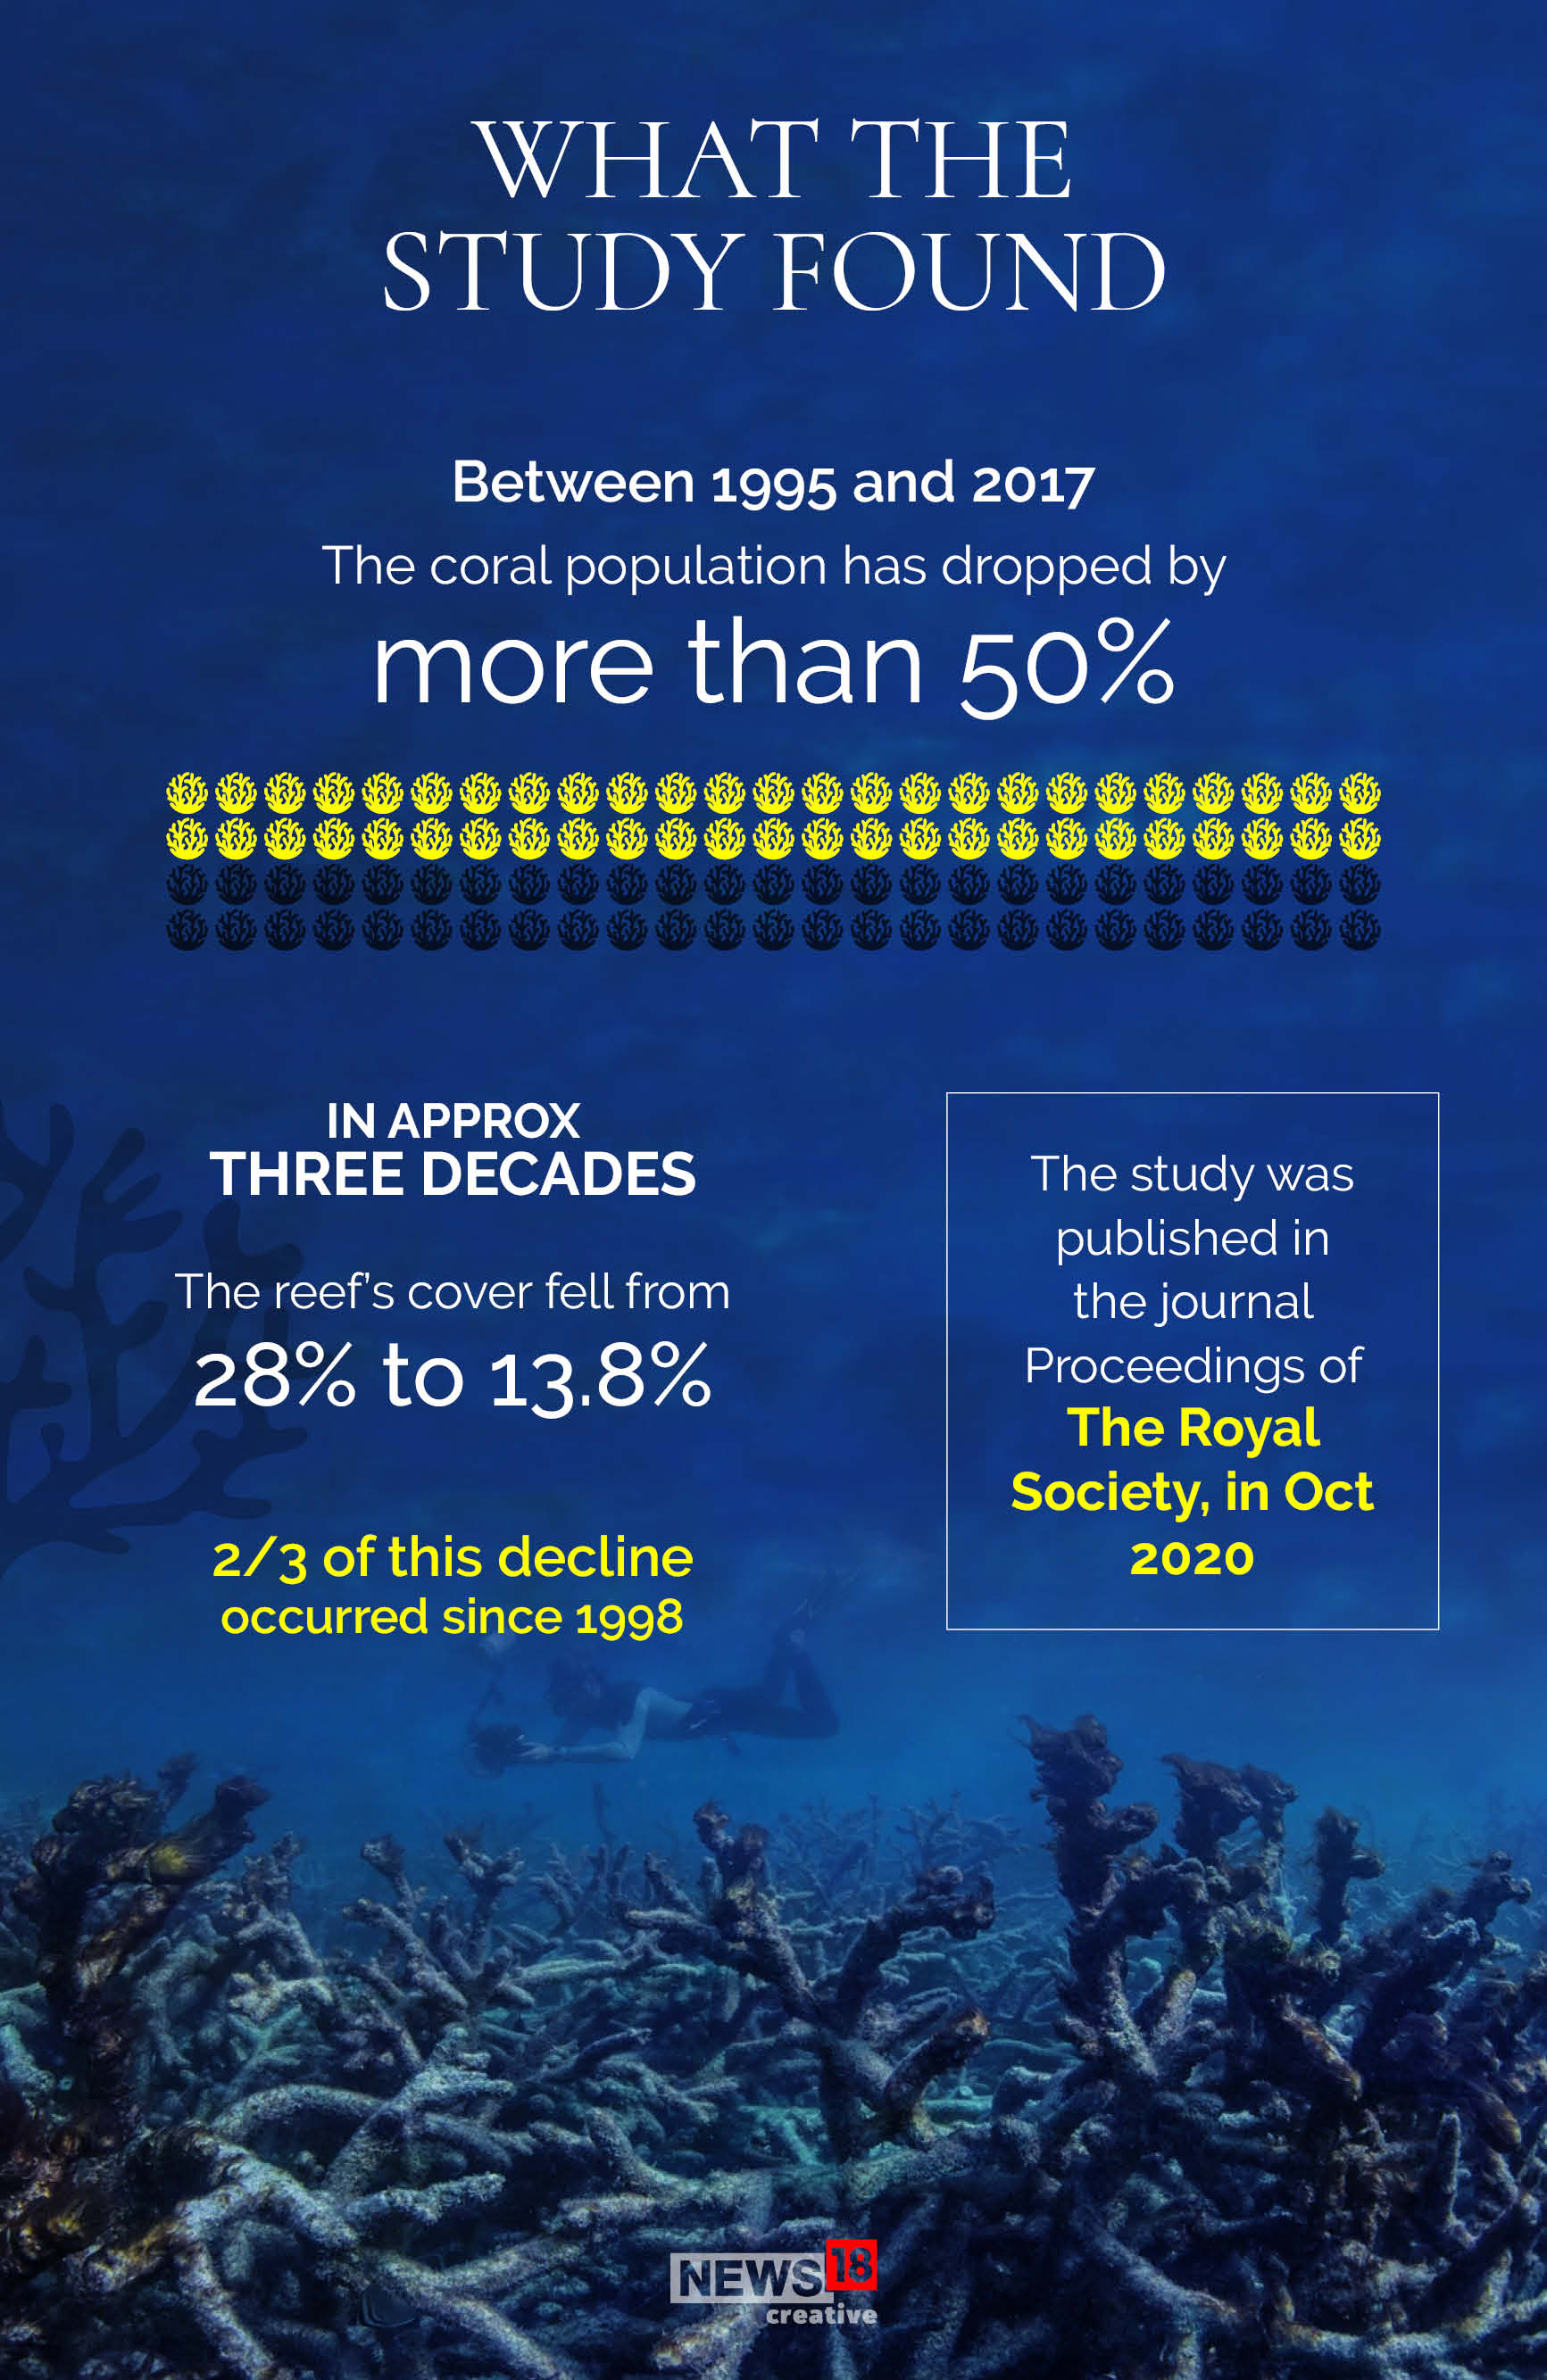 The Great Barrier Reef is dying, here's why